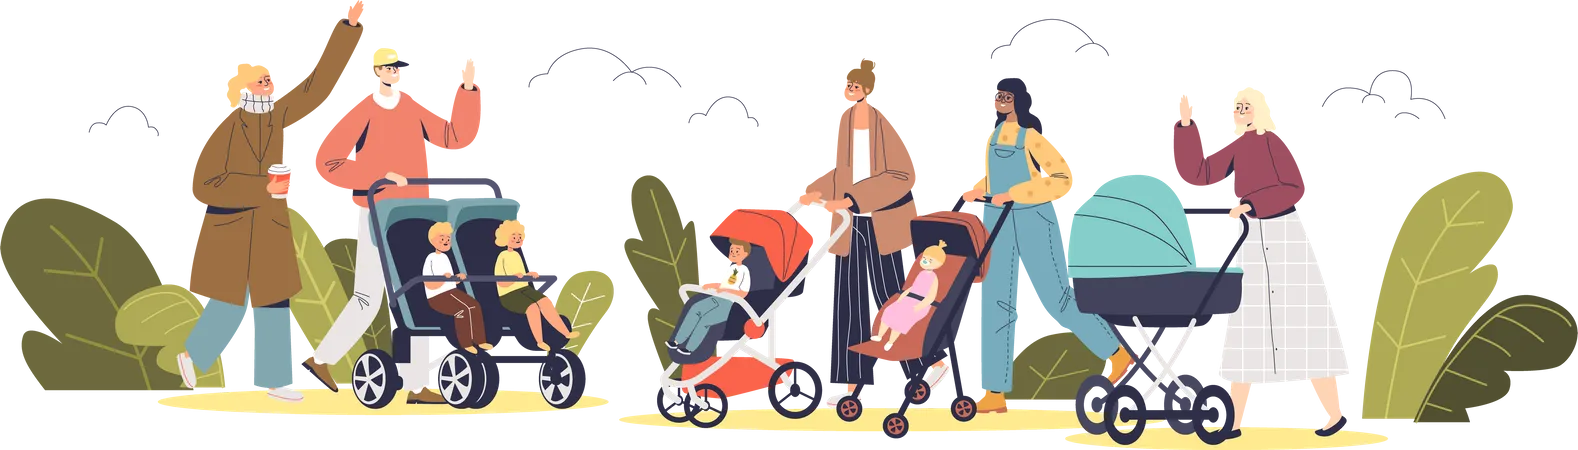 Parents walking with newborn in the park Illustration